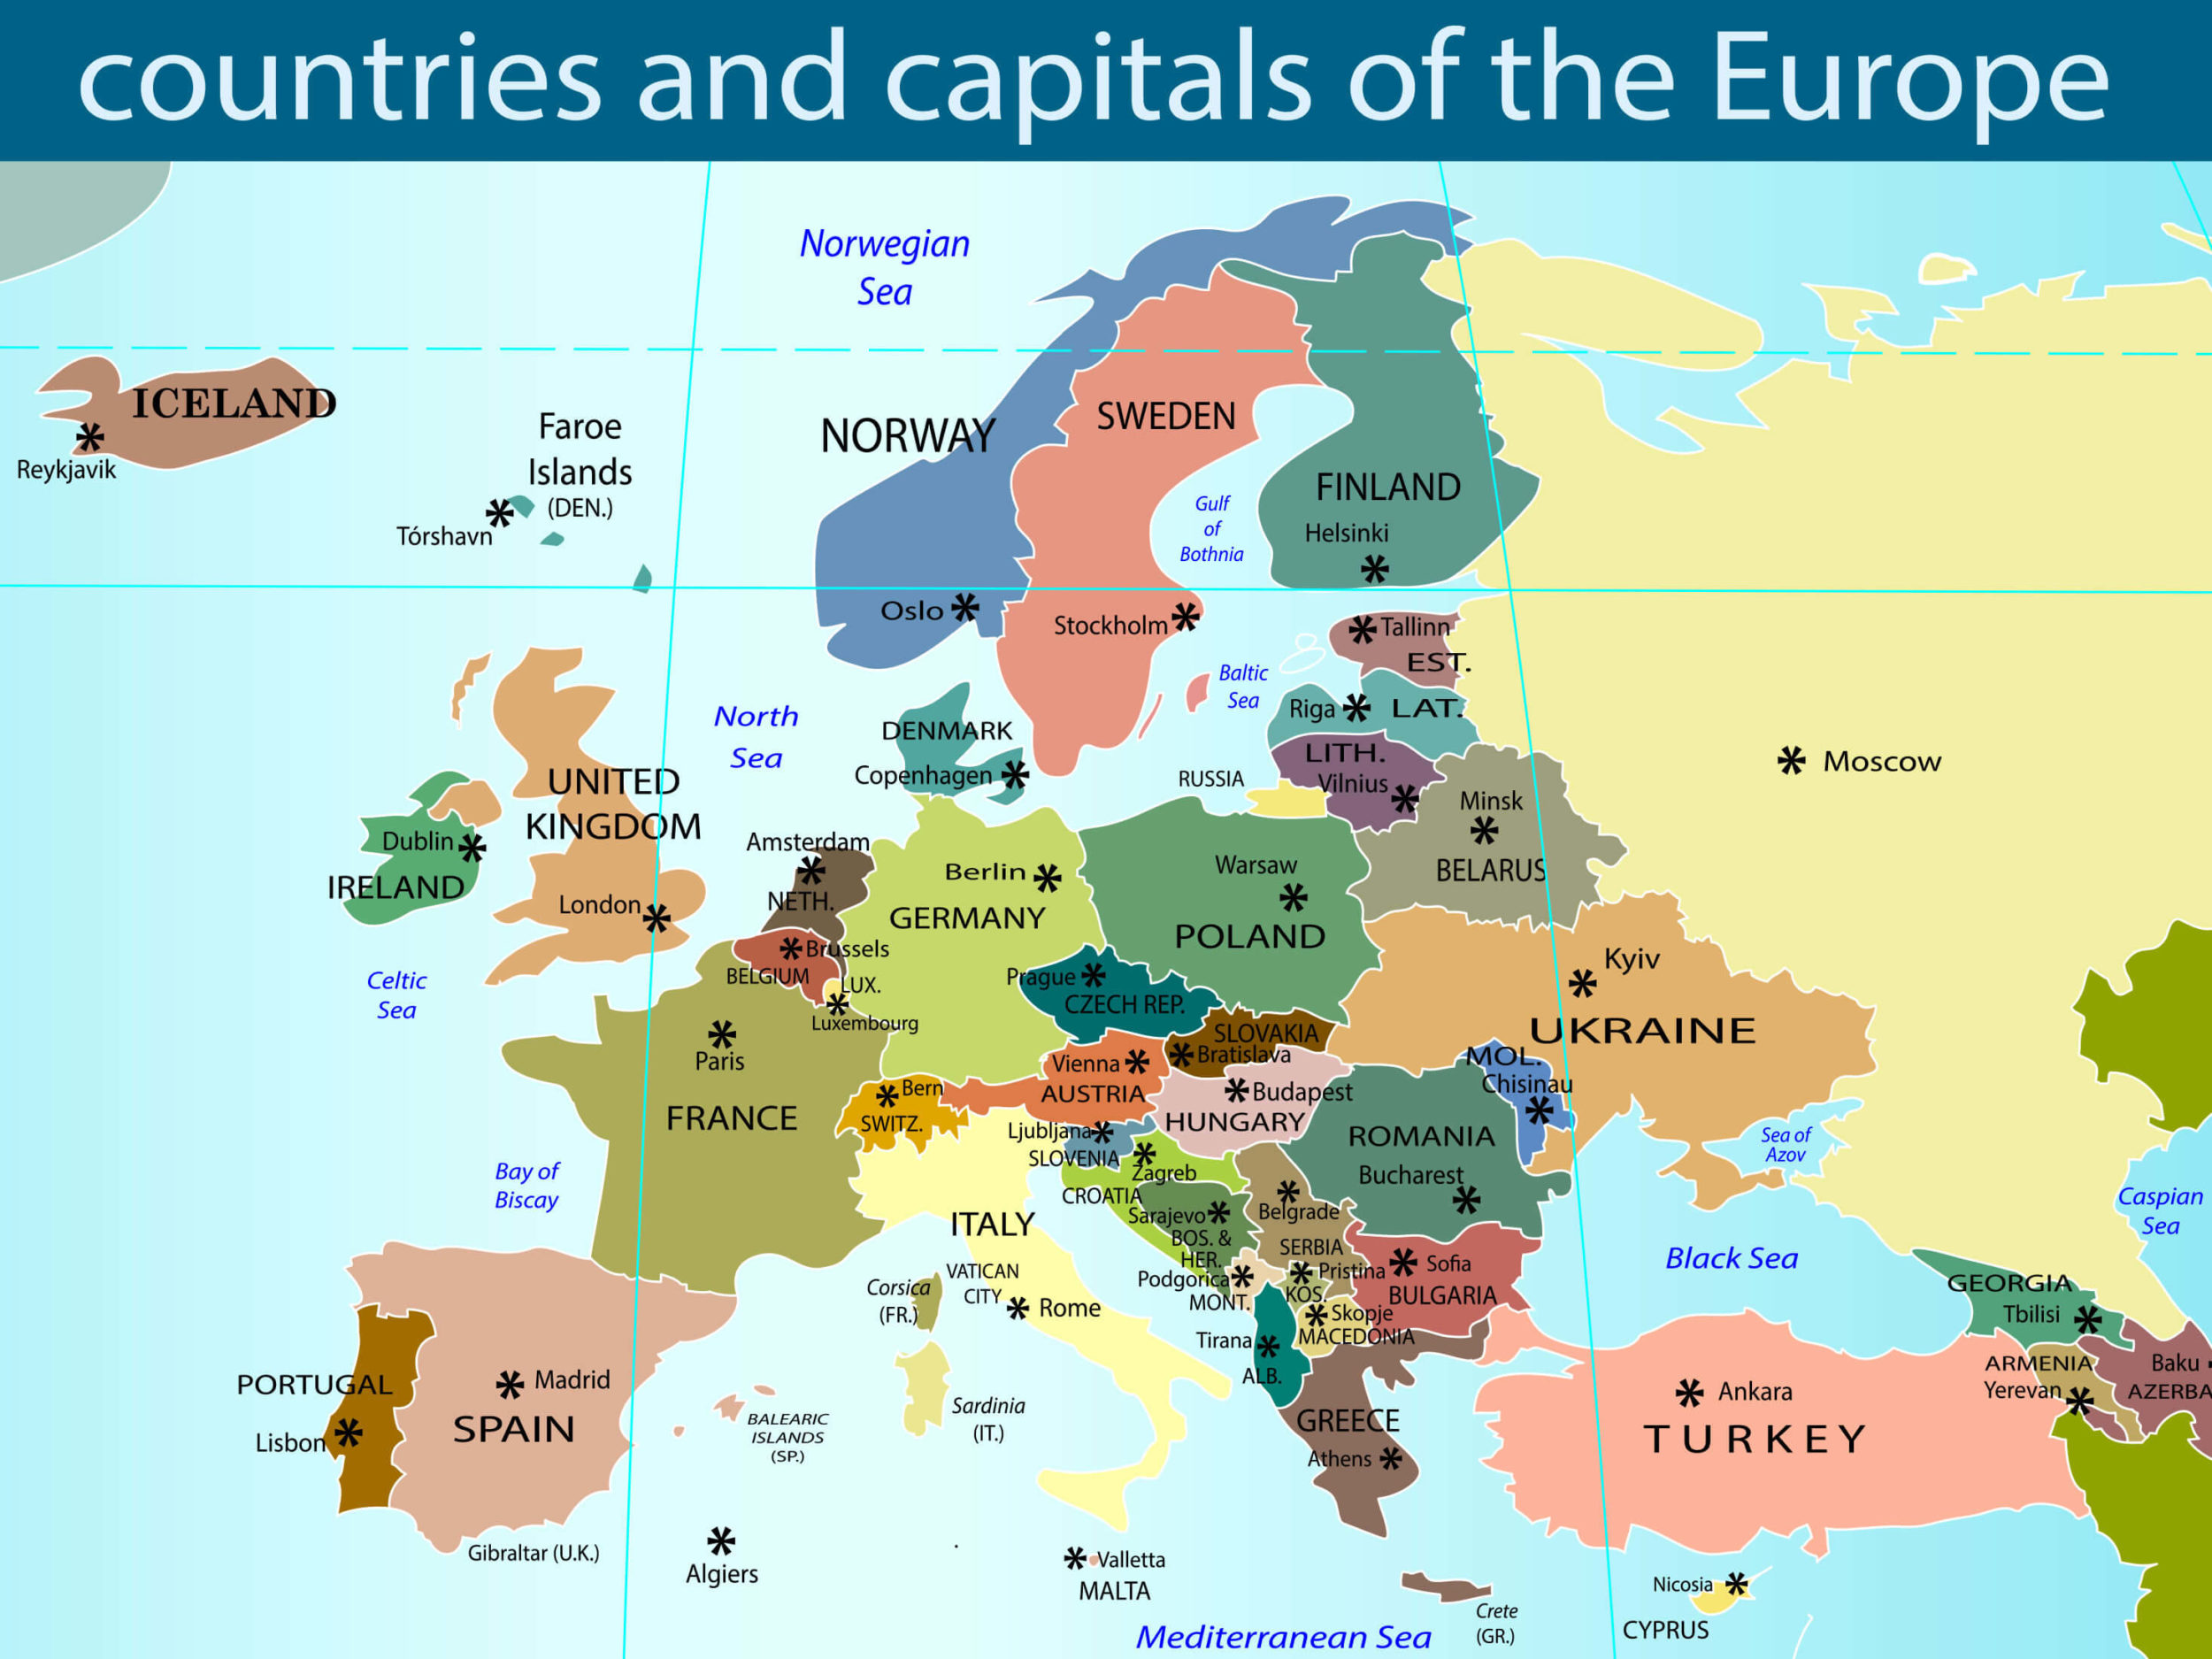 HD Map of Europe